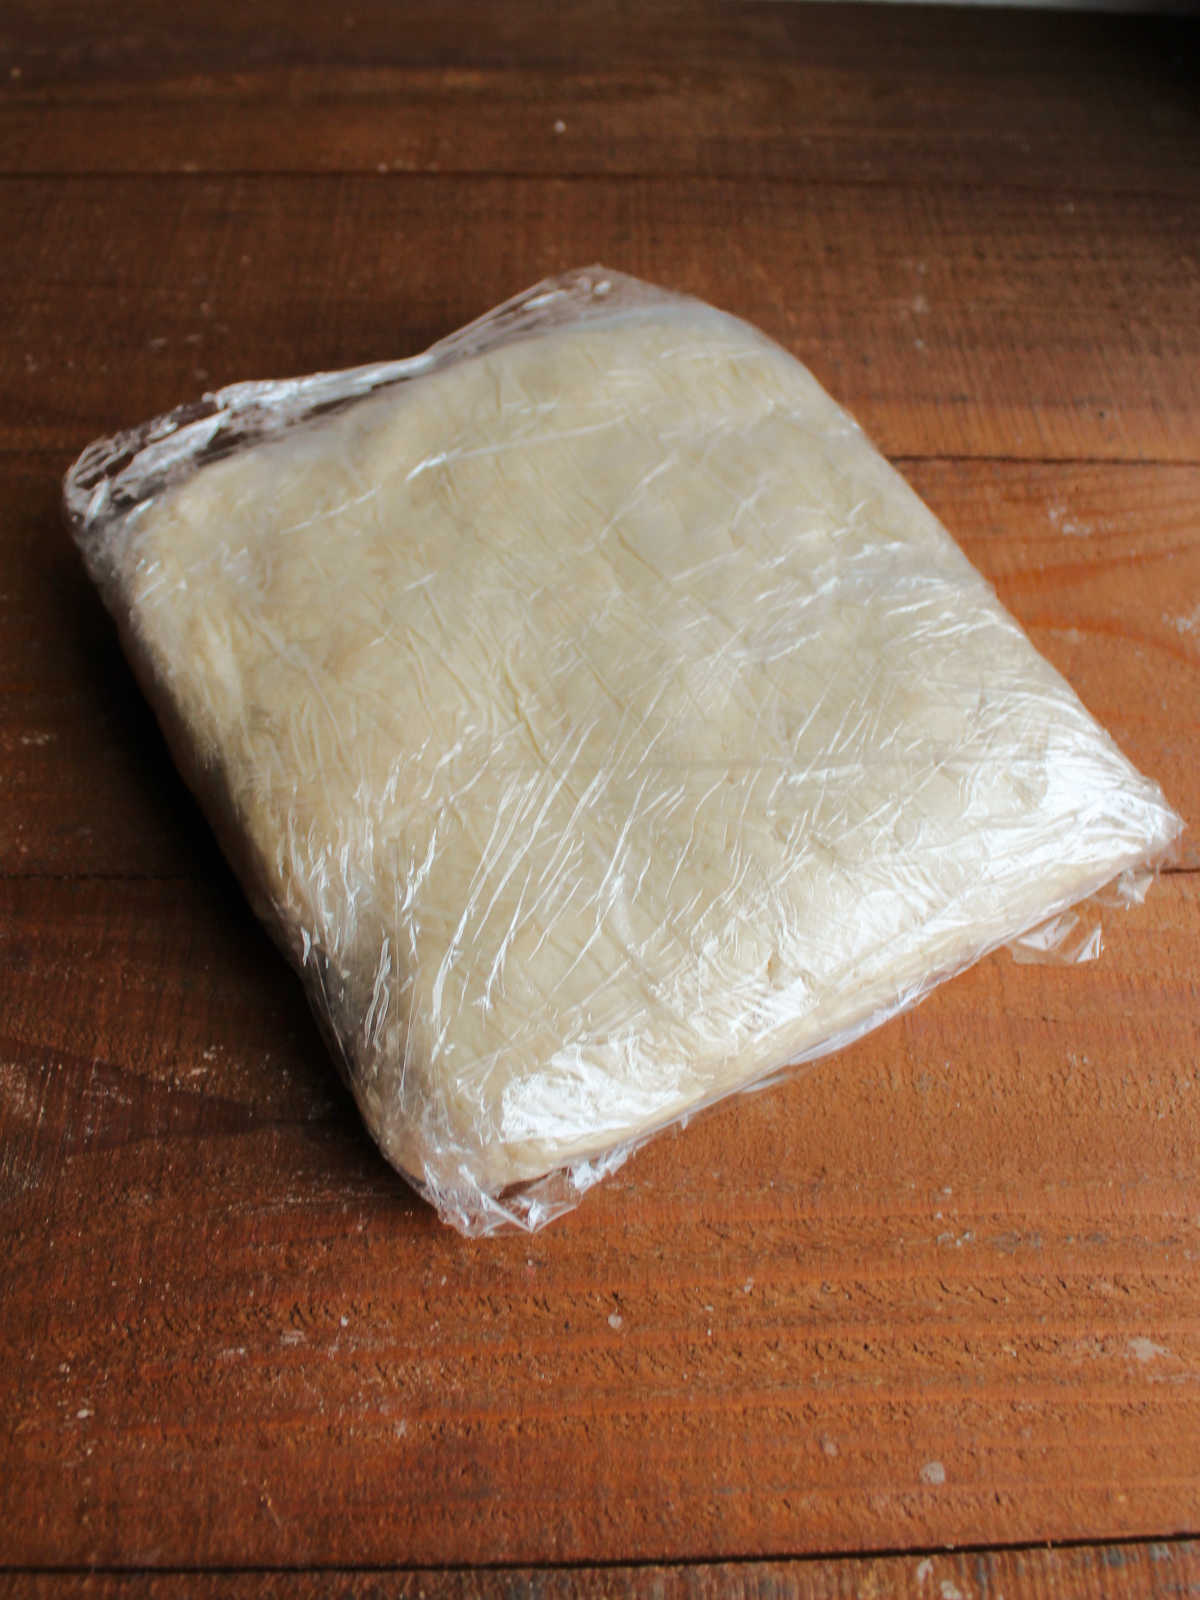 Kolacky dough wrapped in plastic wrap chilled and ready to be rolled out.